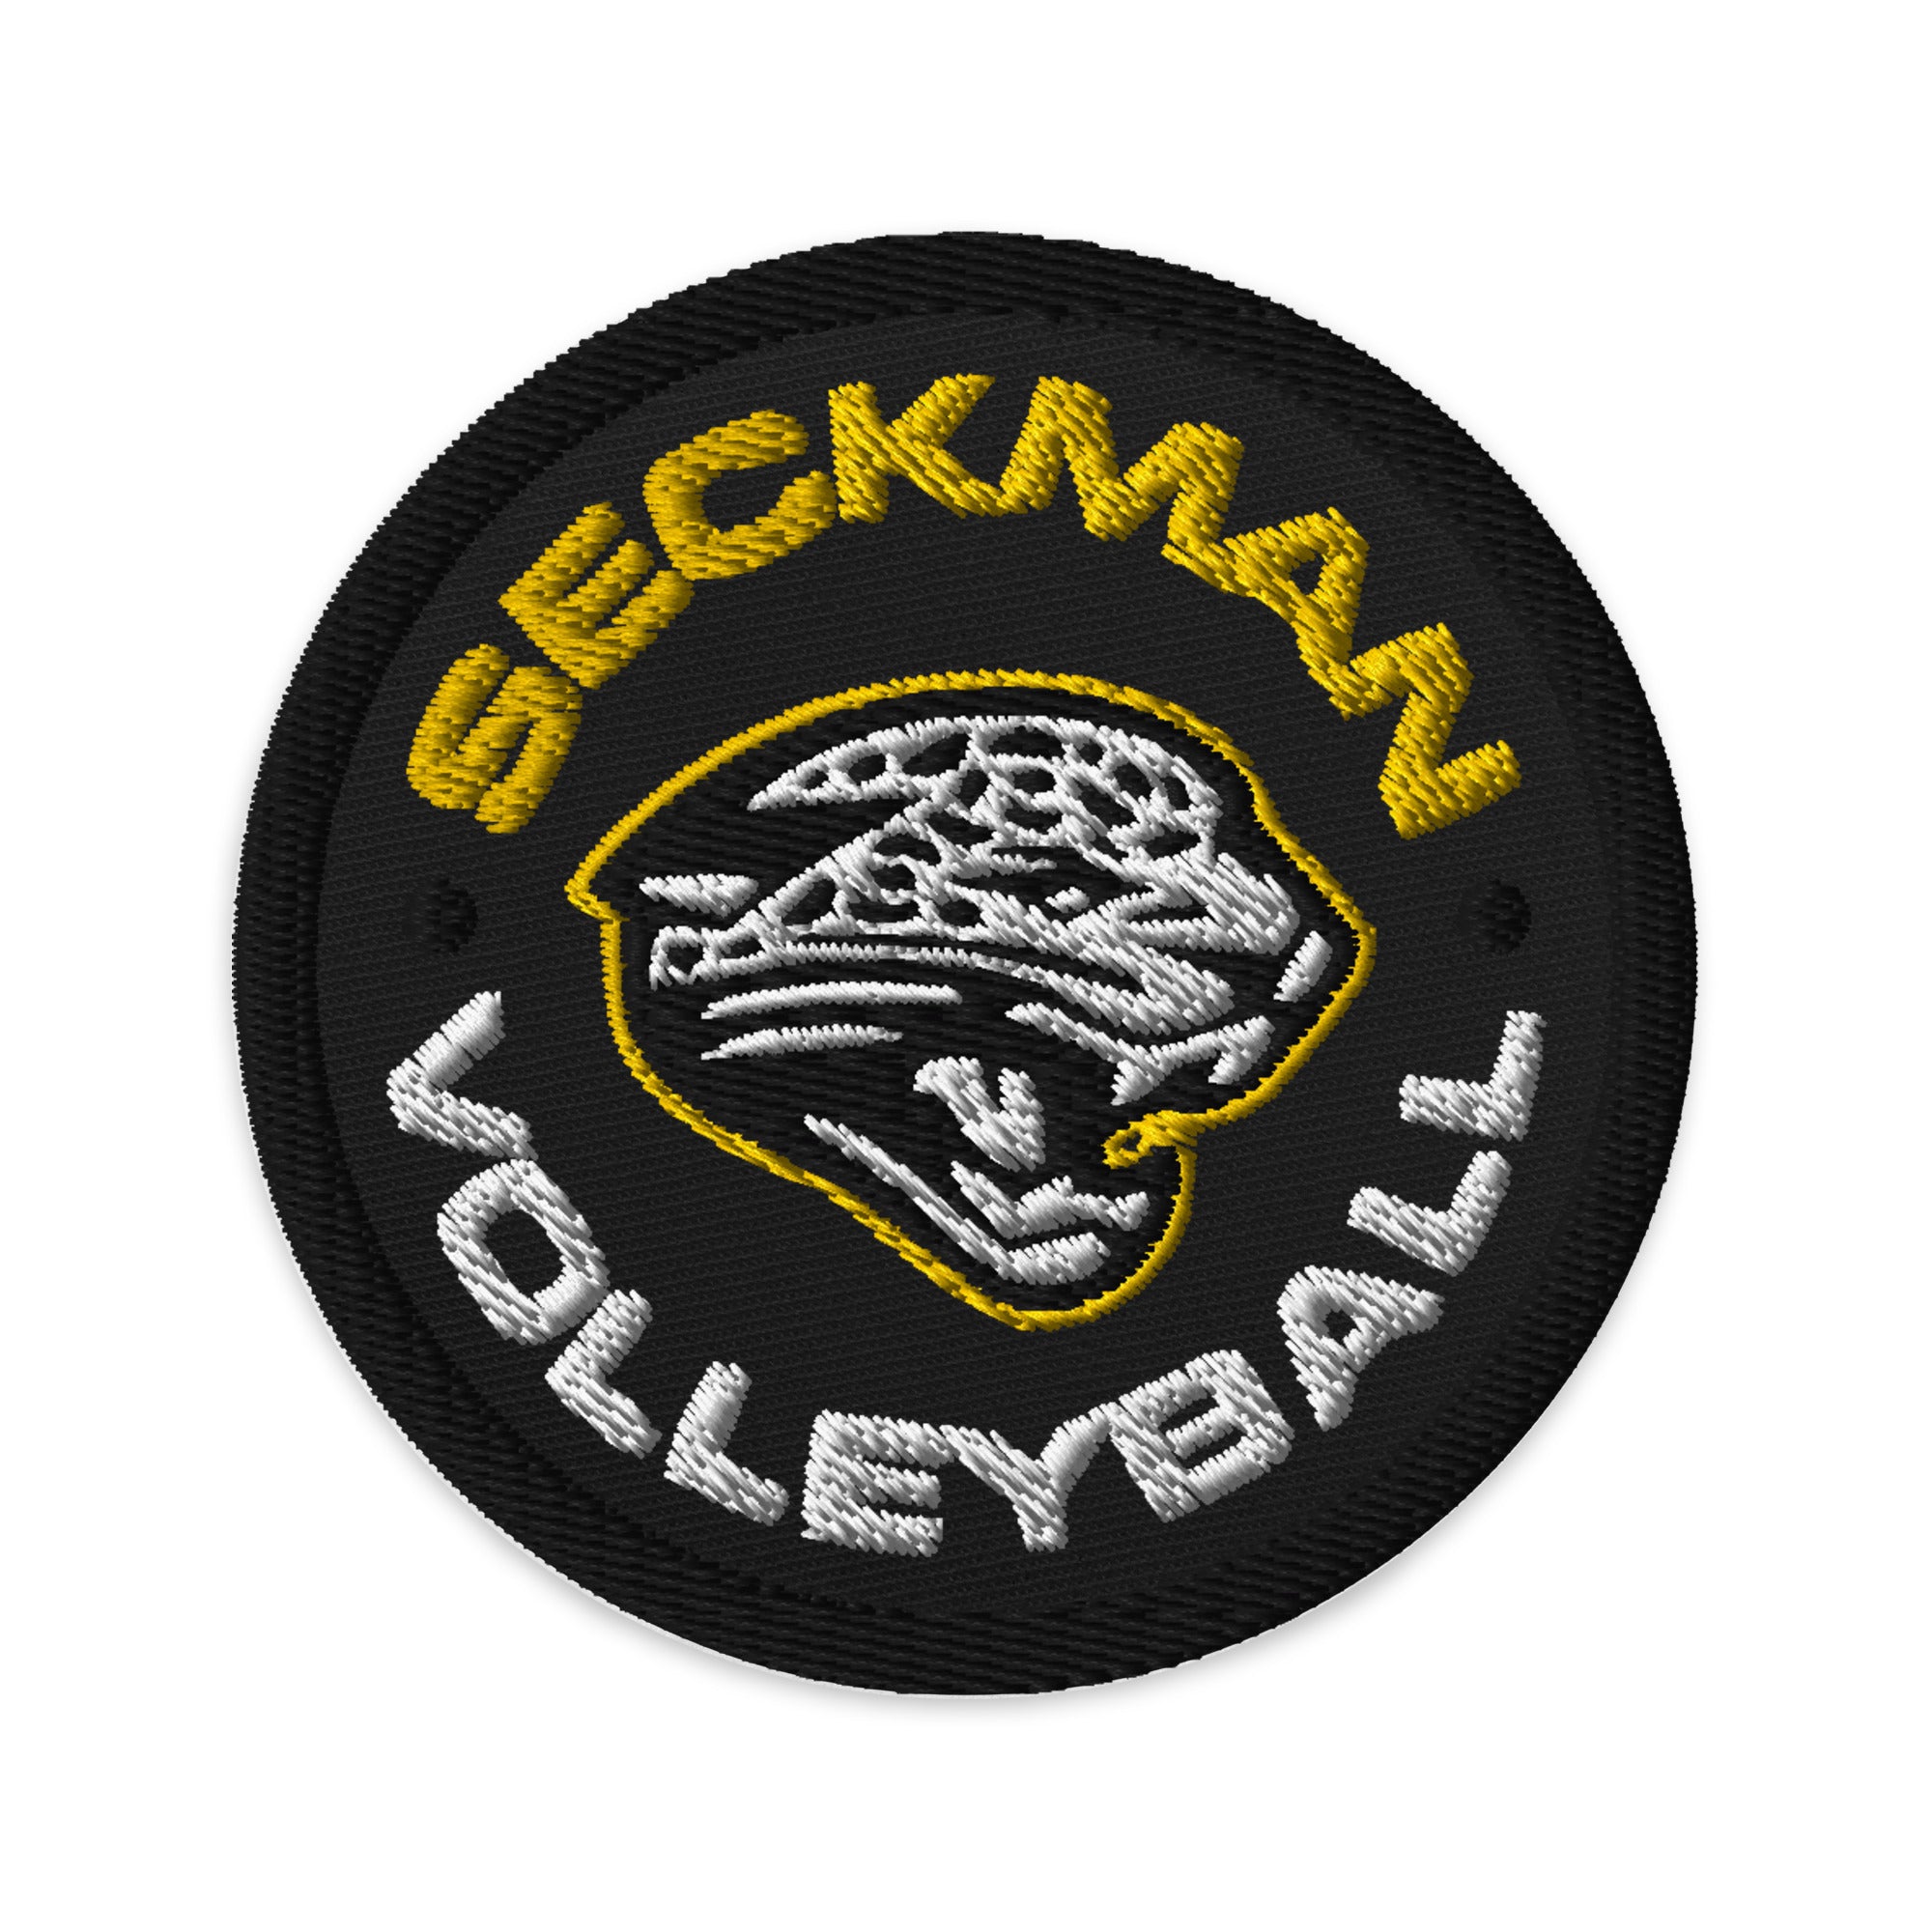 Seckman Volleyball Embroidered Patches